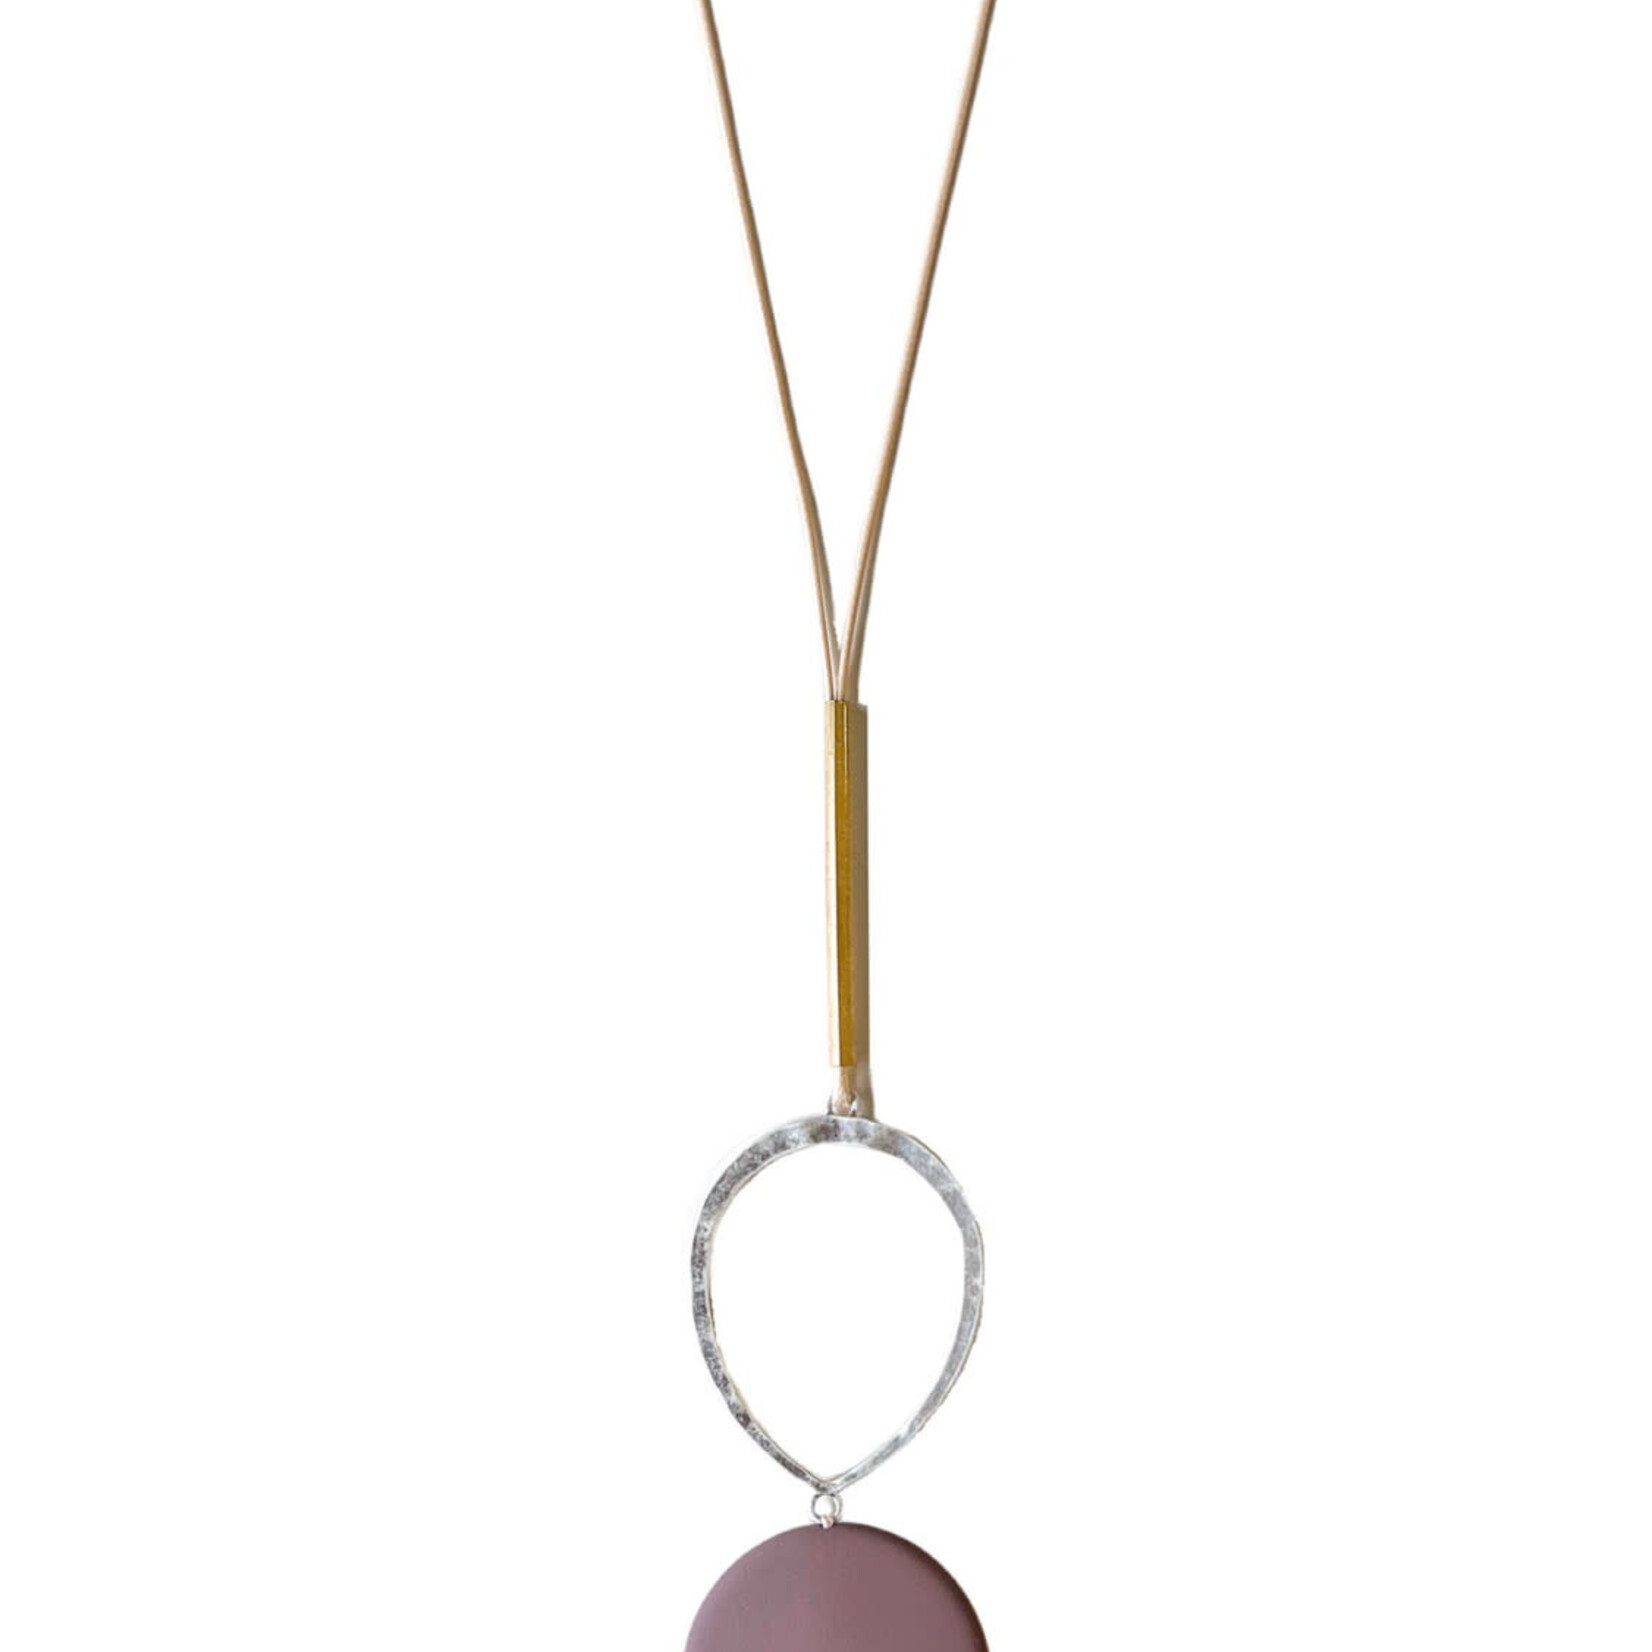 Long Cream Cord Silver Accent with Mauve Pendant Necklace